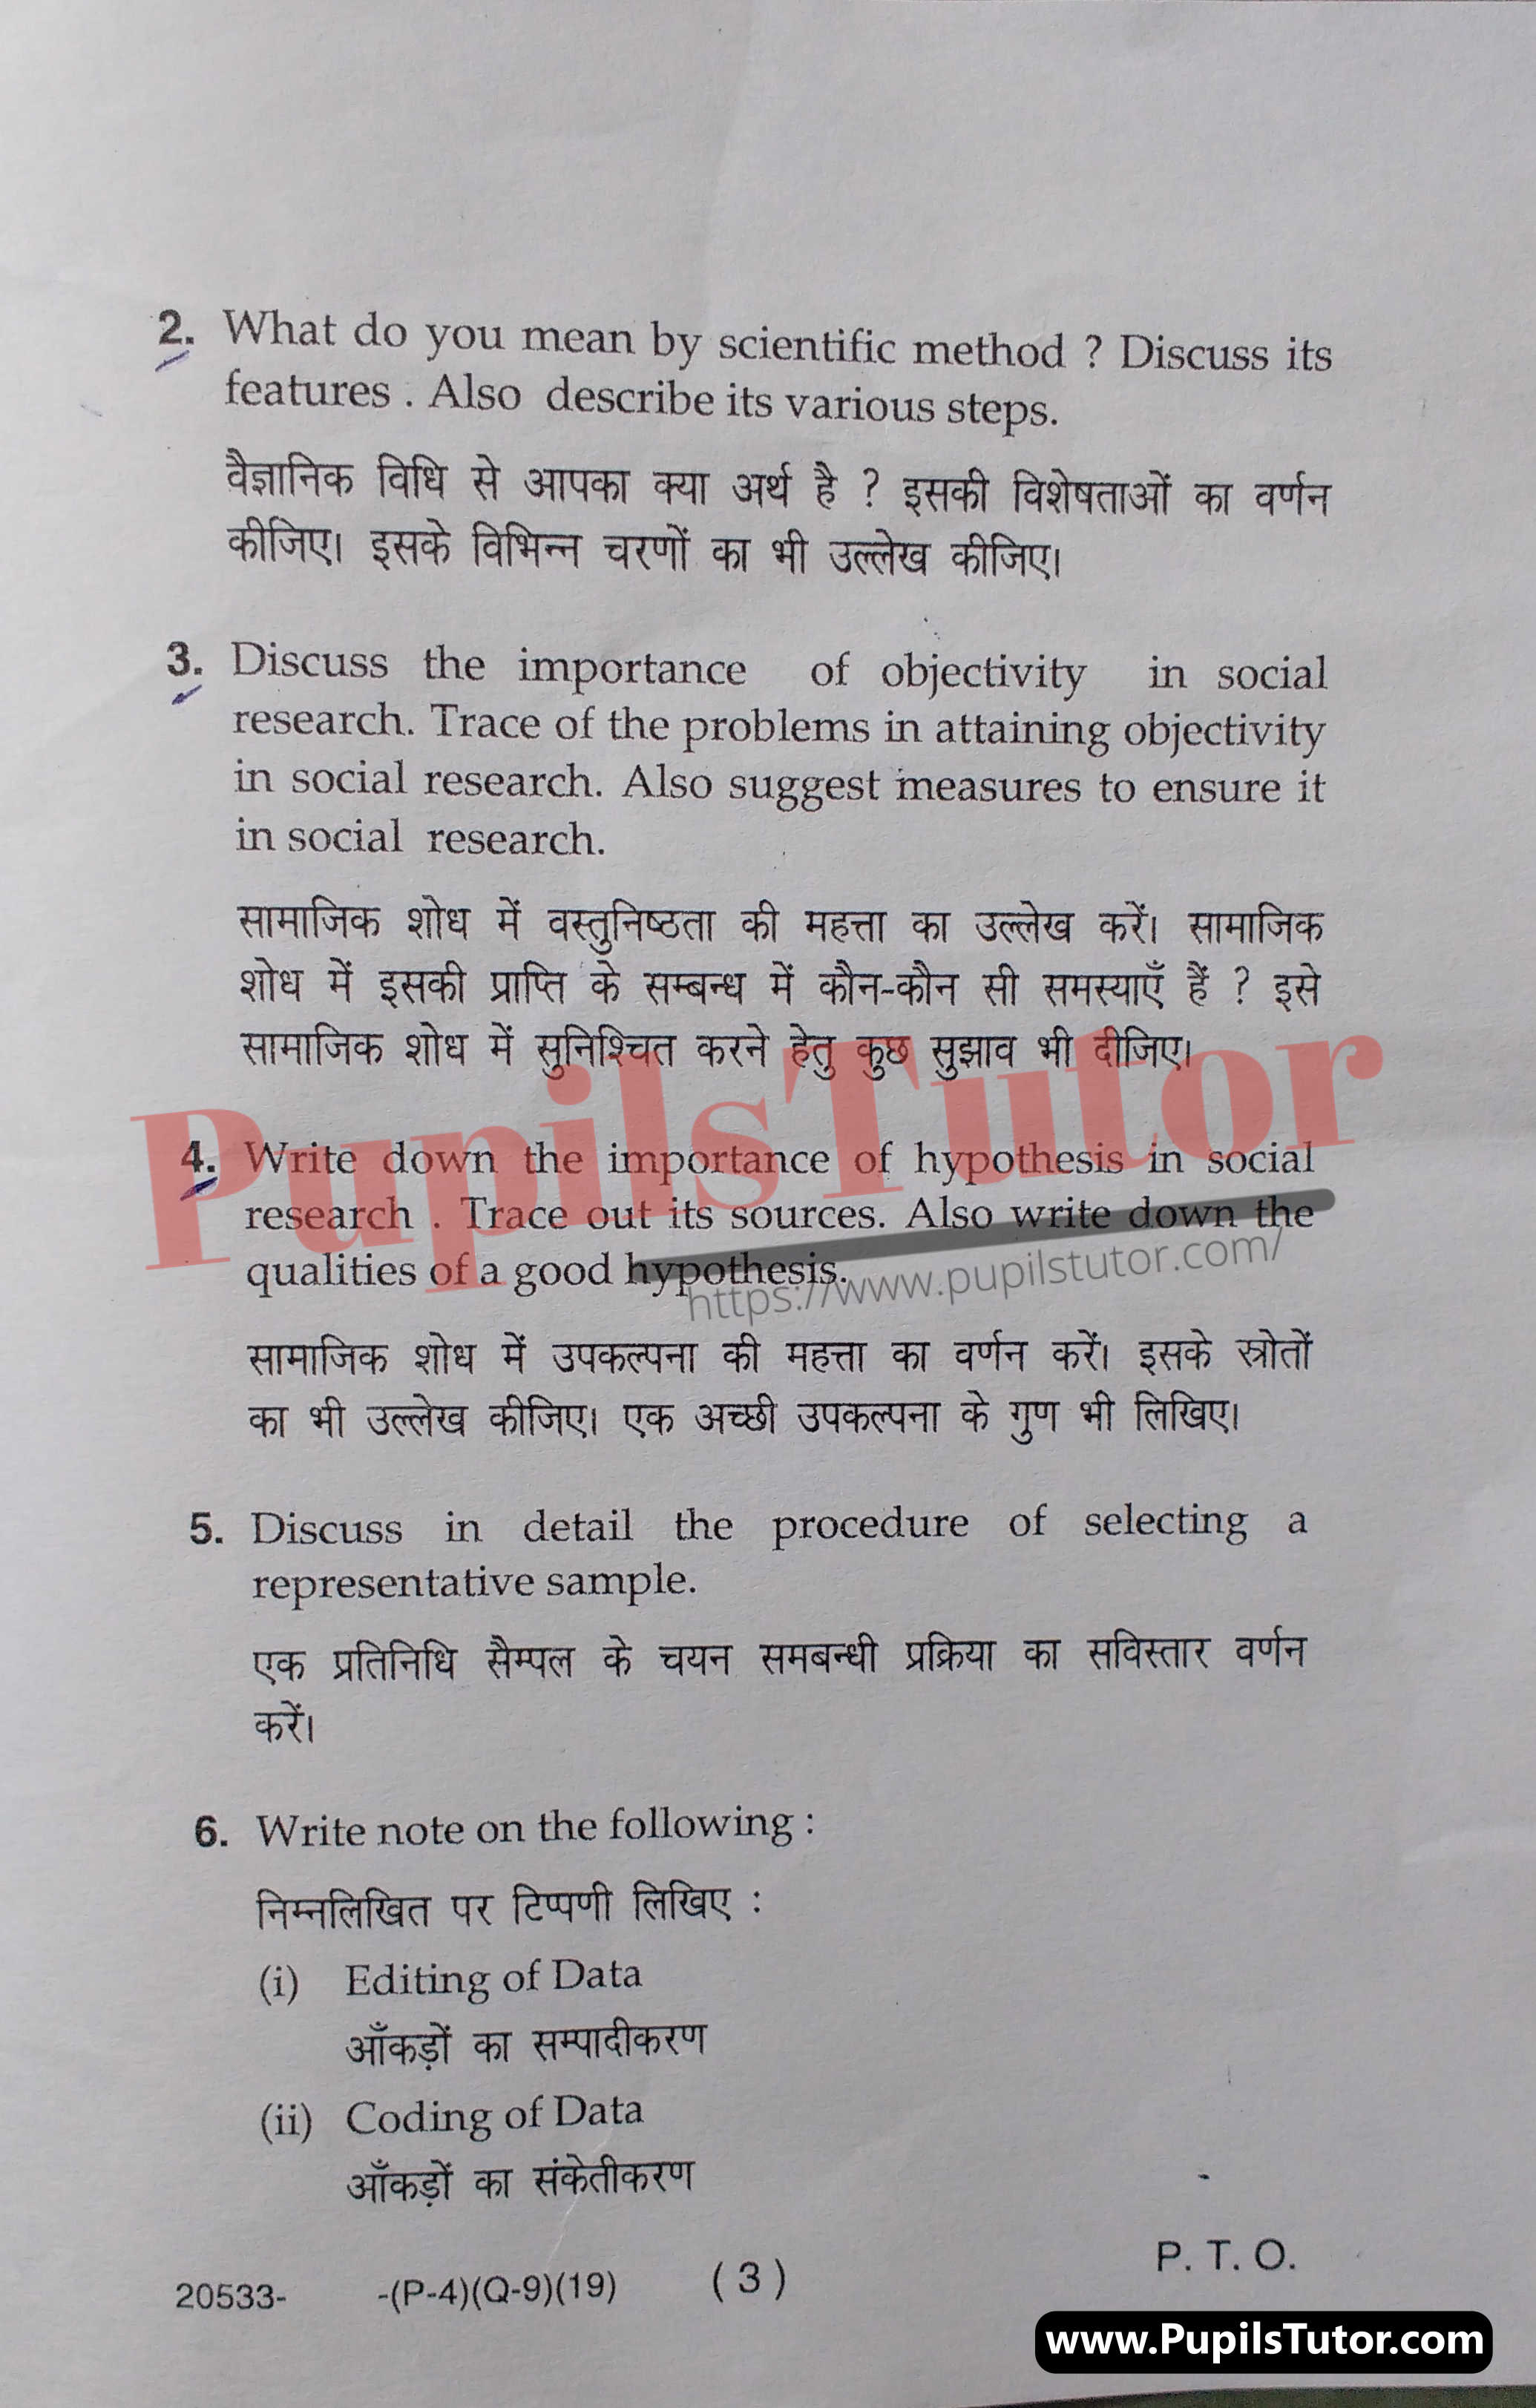 Free Download PDF Of M.D. University M.A. [Public Administration] Second Year Latest Question Paper For Research Methods Subject (Page 3) - https://www.pupilstutor.com